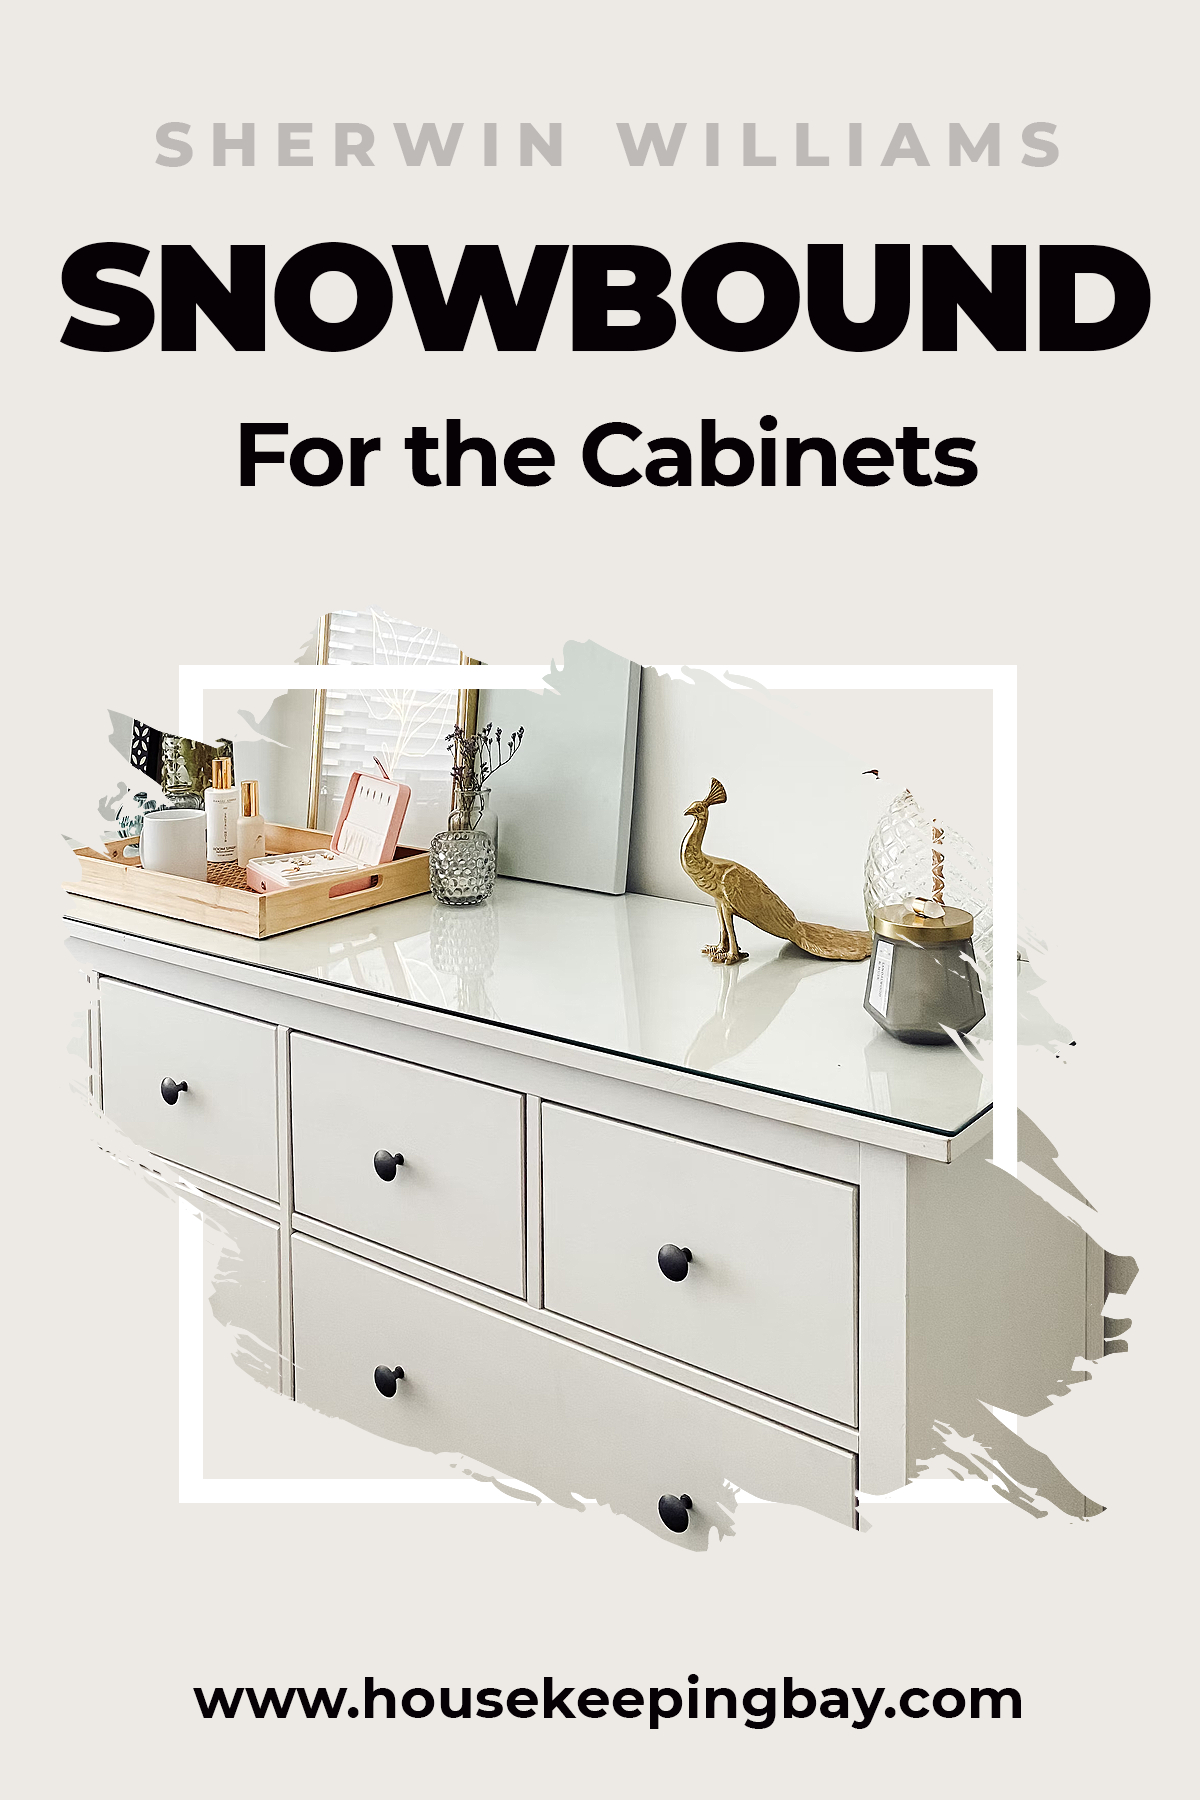 Snowbound For the Cabinets